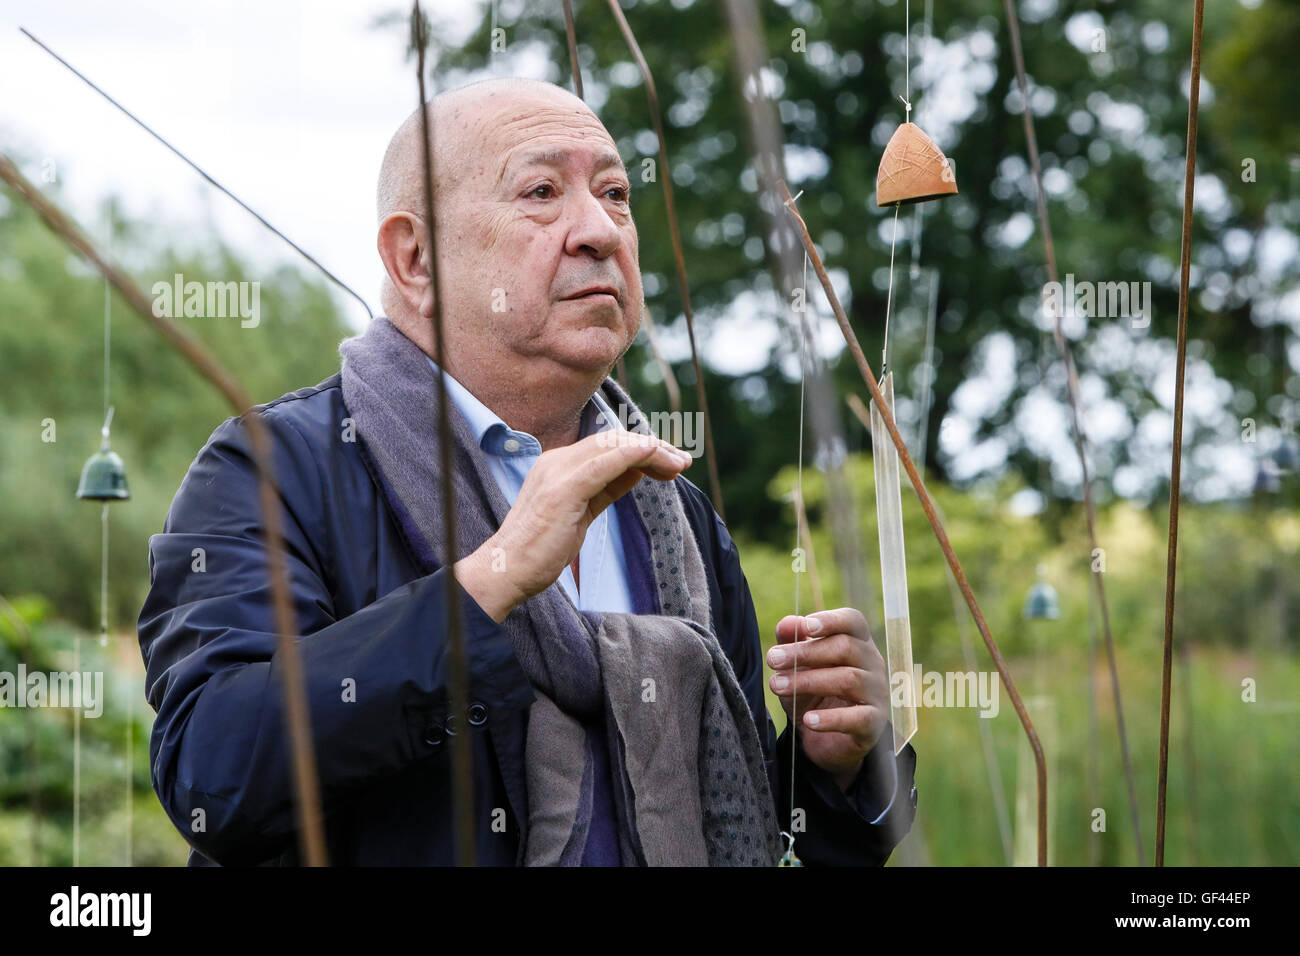 Edinburgh, Scotland, UK. 29th July, 2016. Jupiter Artland has launched its Summer Programme as part of the Edinburgh Art Festival 2016. Renowned French artist Christian Boltanski is featured with a new permanent installation, Animitas. Comprised of hundreds of Japanese bells placed on an island to reproduce the map of the stars on the day the artist was born. Credit:  Richard Dyson/Alamy Live News Stock Photo